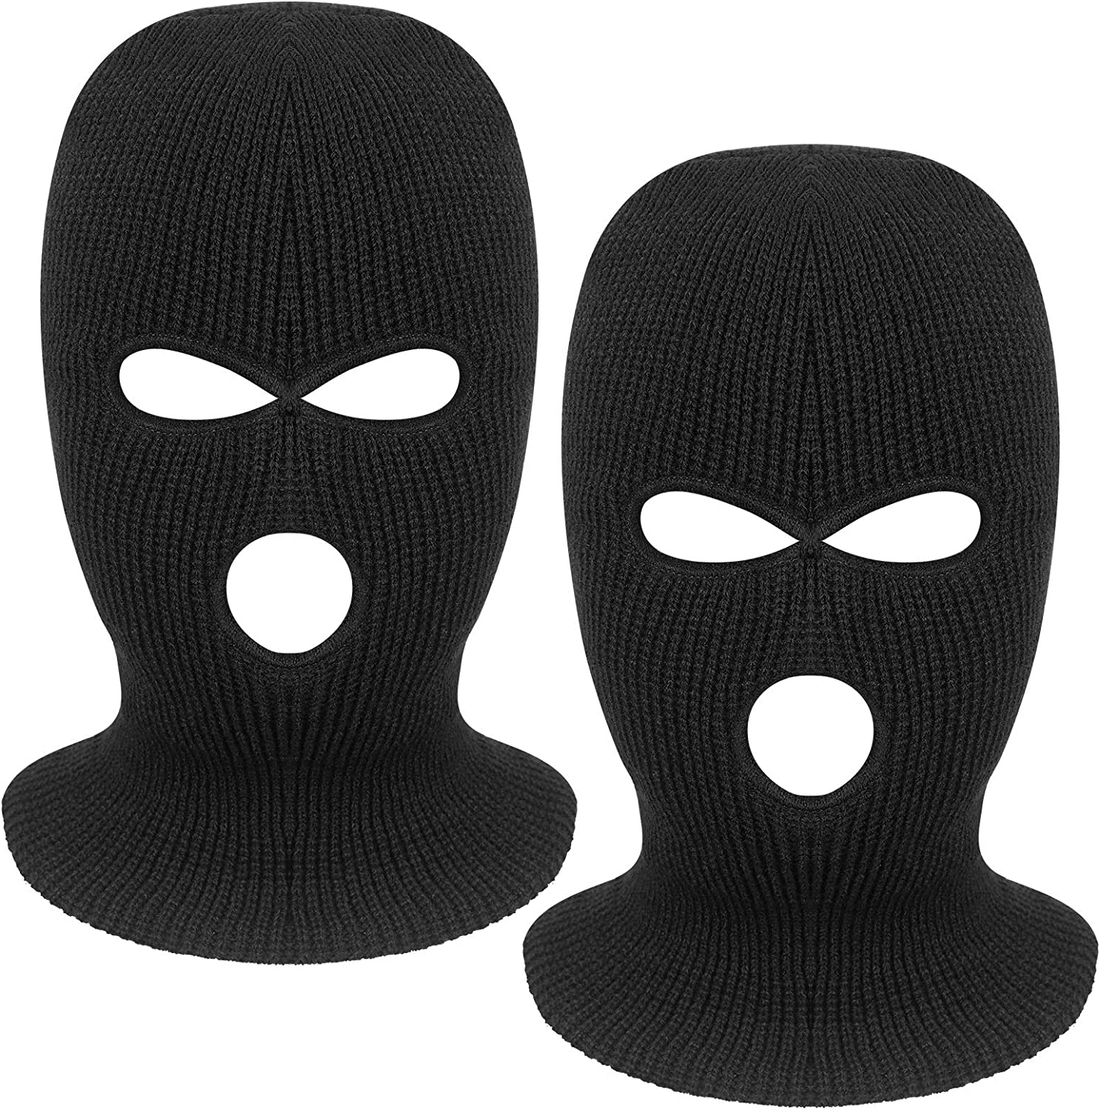 Rave Essentials Co. (2 Pack) Black / 3-5 Day Expedited Shipping [USA Only] NEON Vibrant 3-Hole Ski Mask